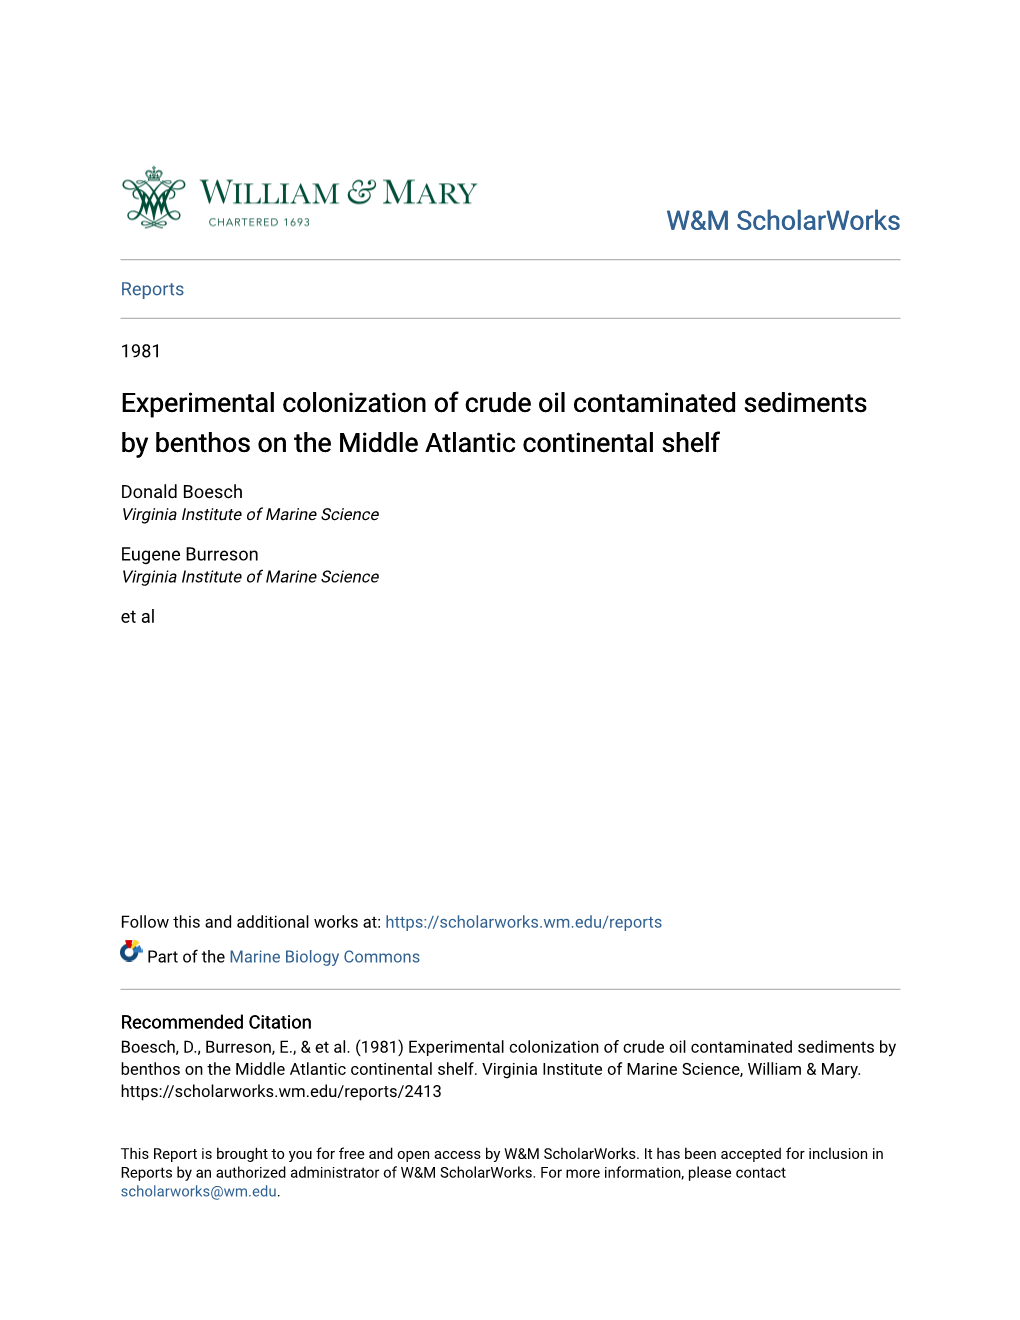 Experimental Colonization of Crude Oil Contaminated Sediments by Benthos on the Middle Atlantic Continental Shelf